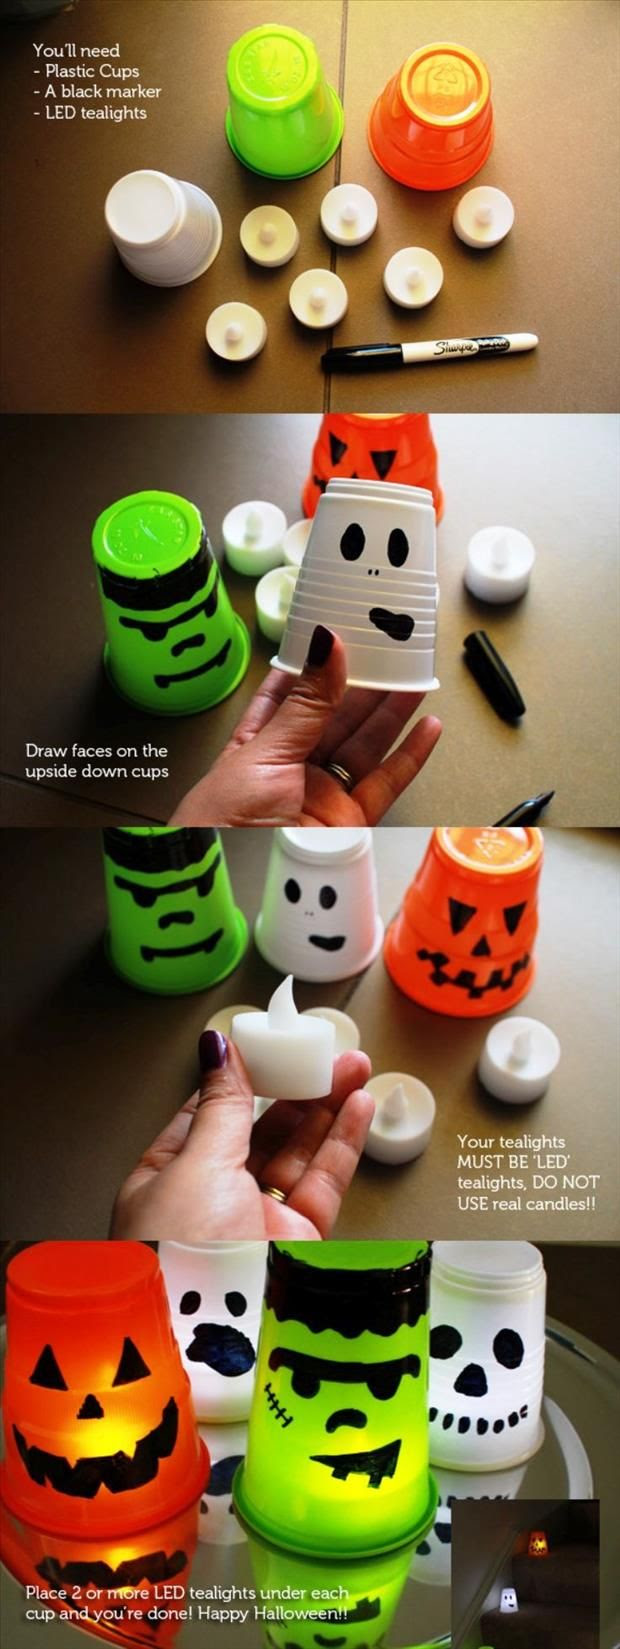 17 More DIY Crafts ~ Halloween Edition - FB Troublemakers